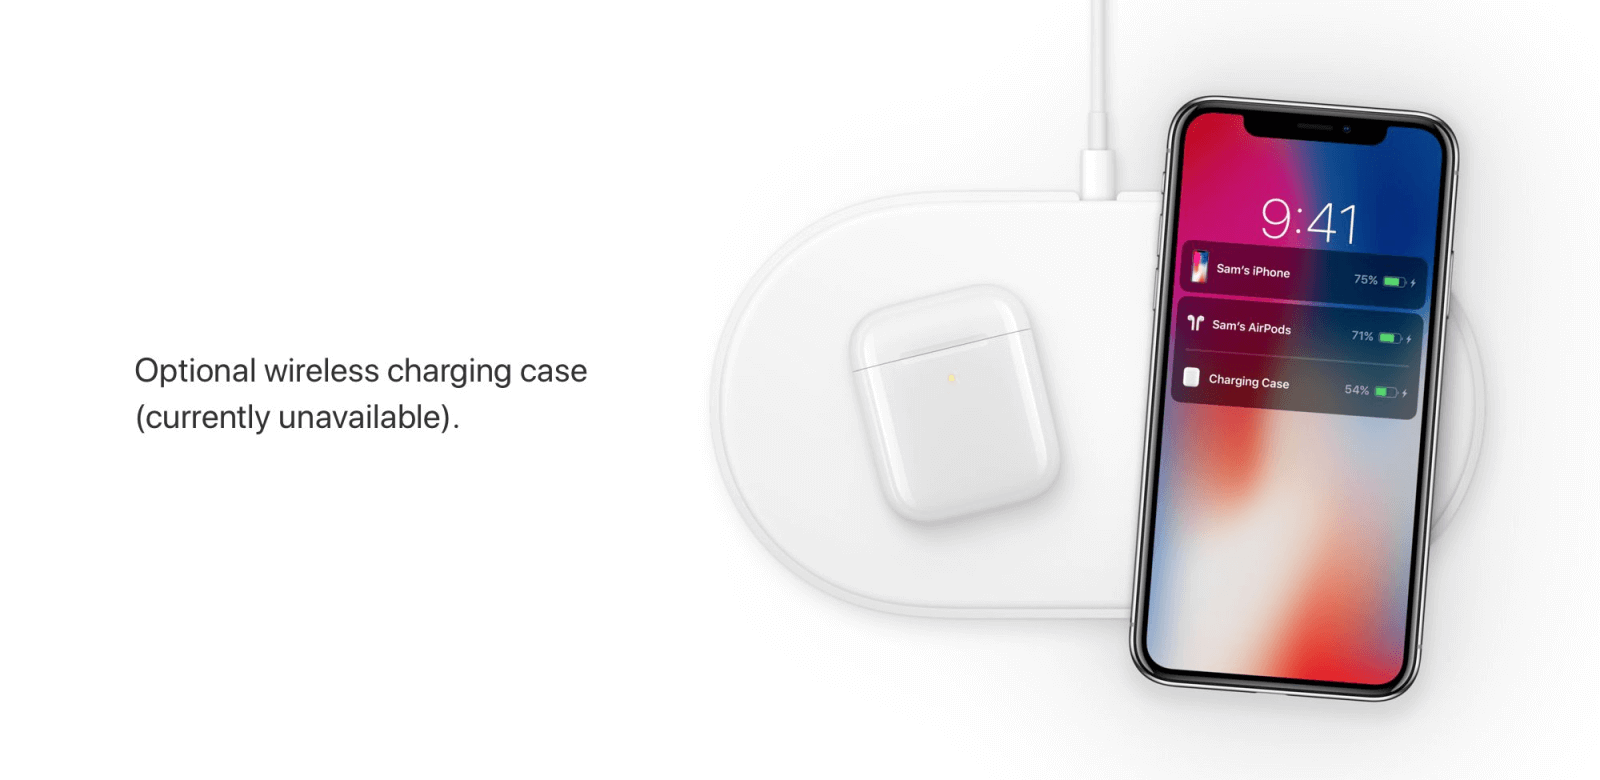 Hidden AirPower image with iPhone XS and new AirPods